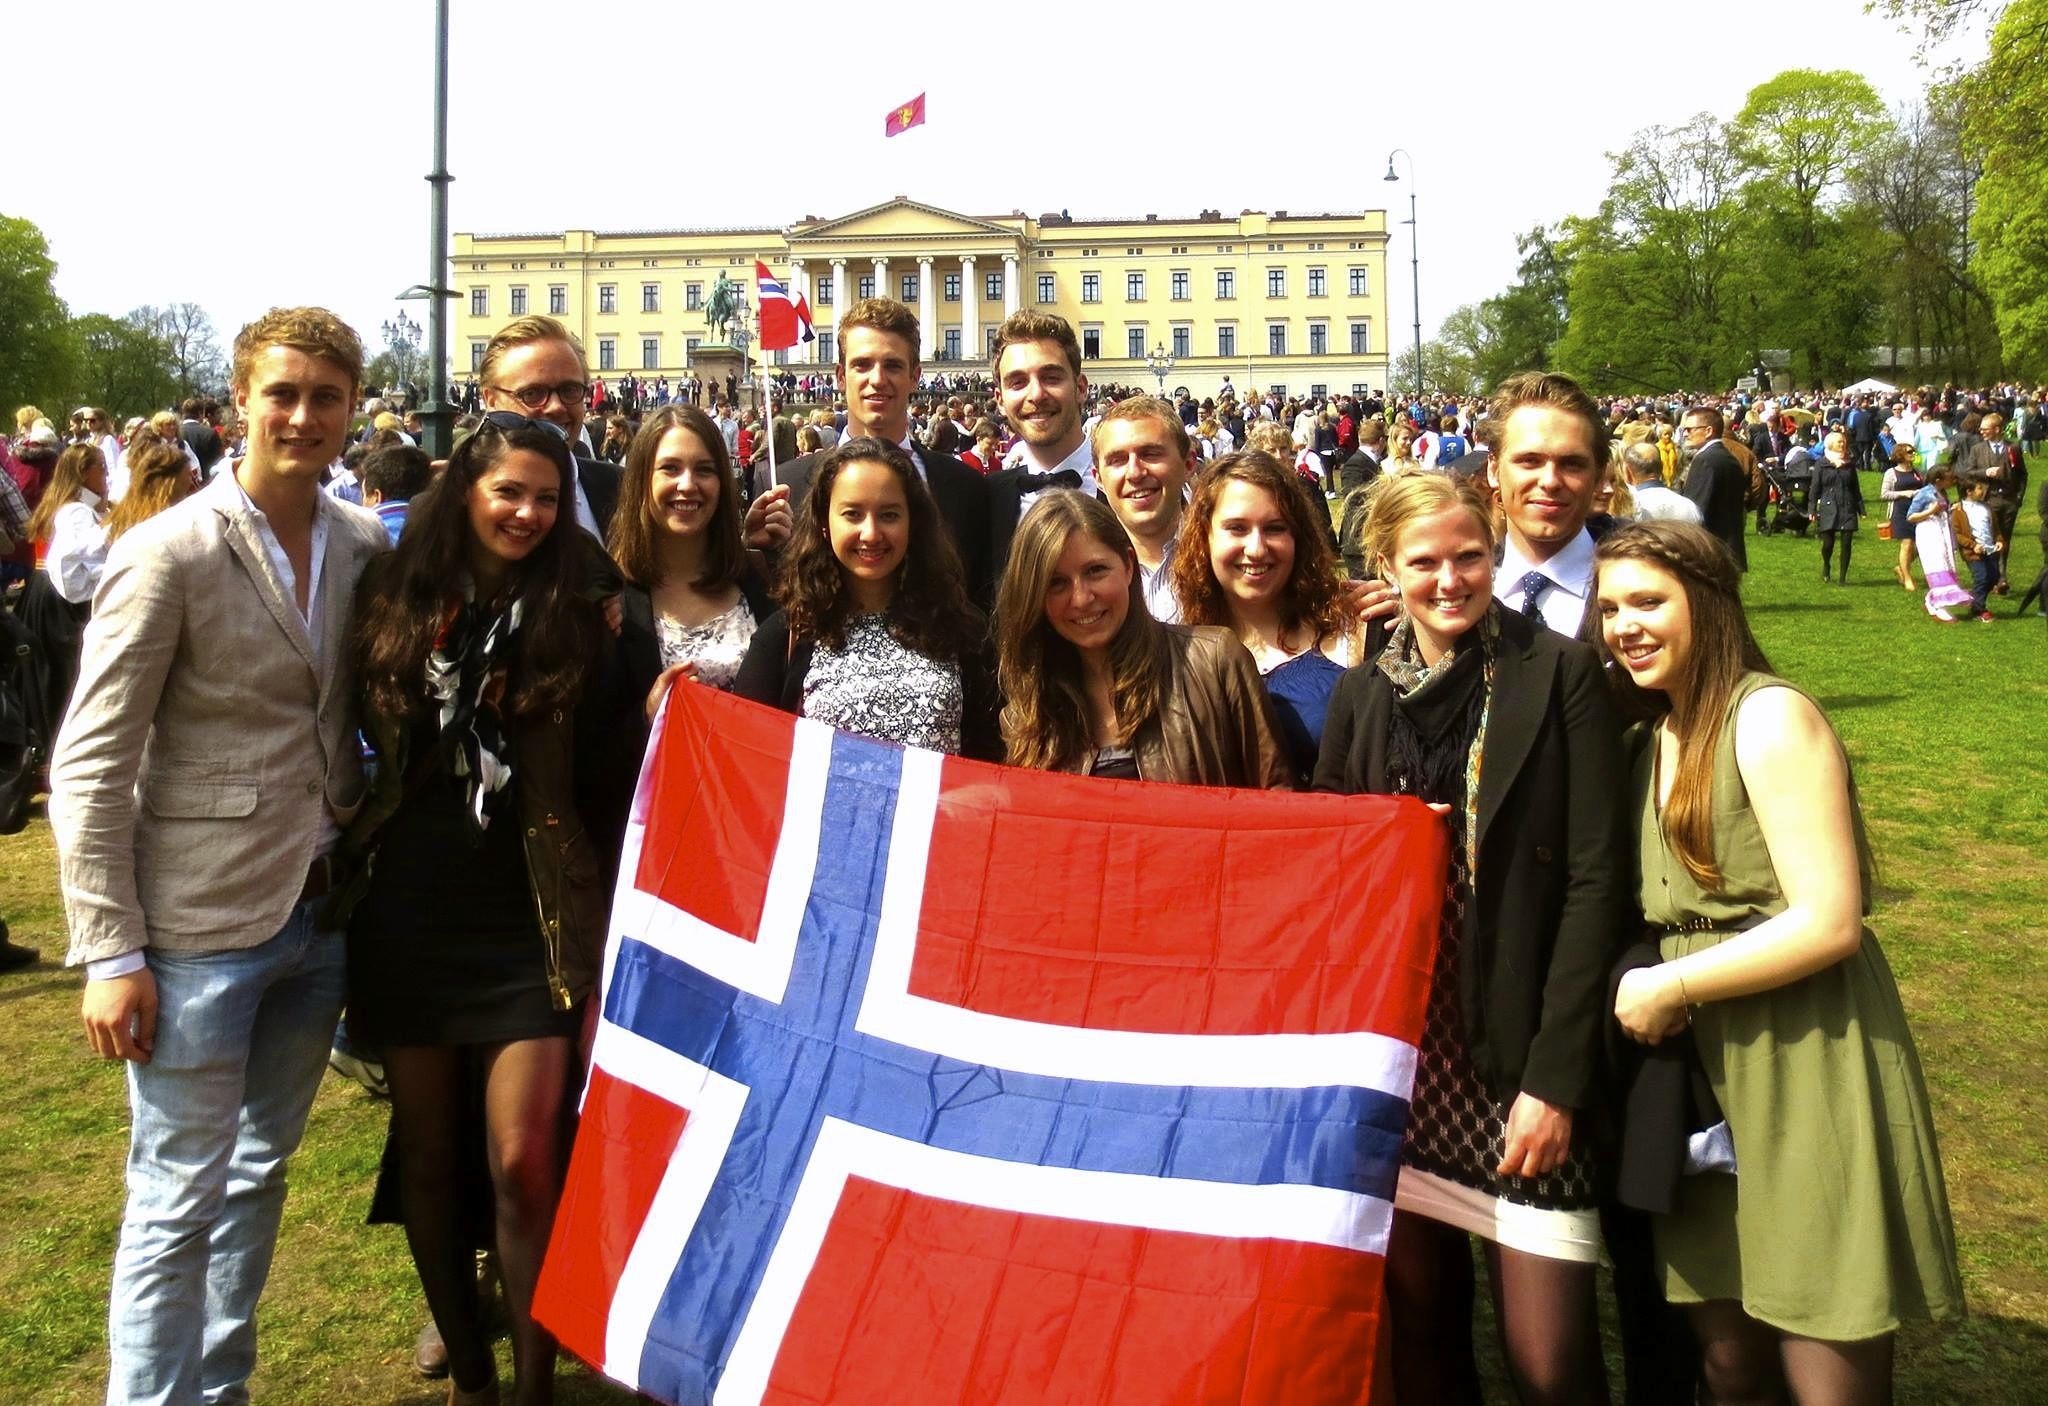 Doctoral Research Fellowship in Literature, Cognition and Emotion at University of Oslo in Norway, 2017